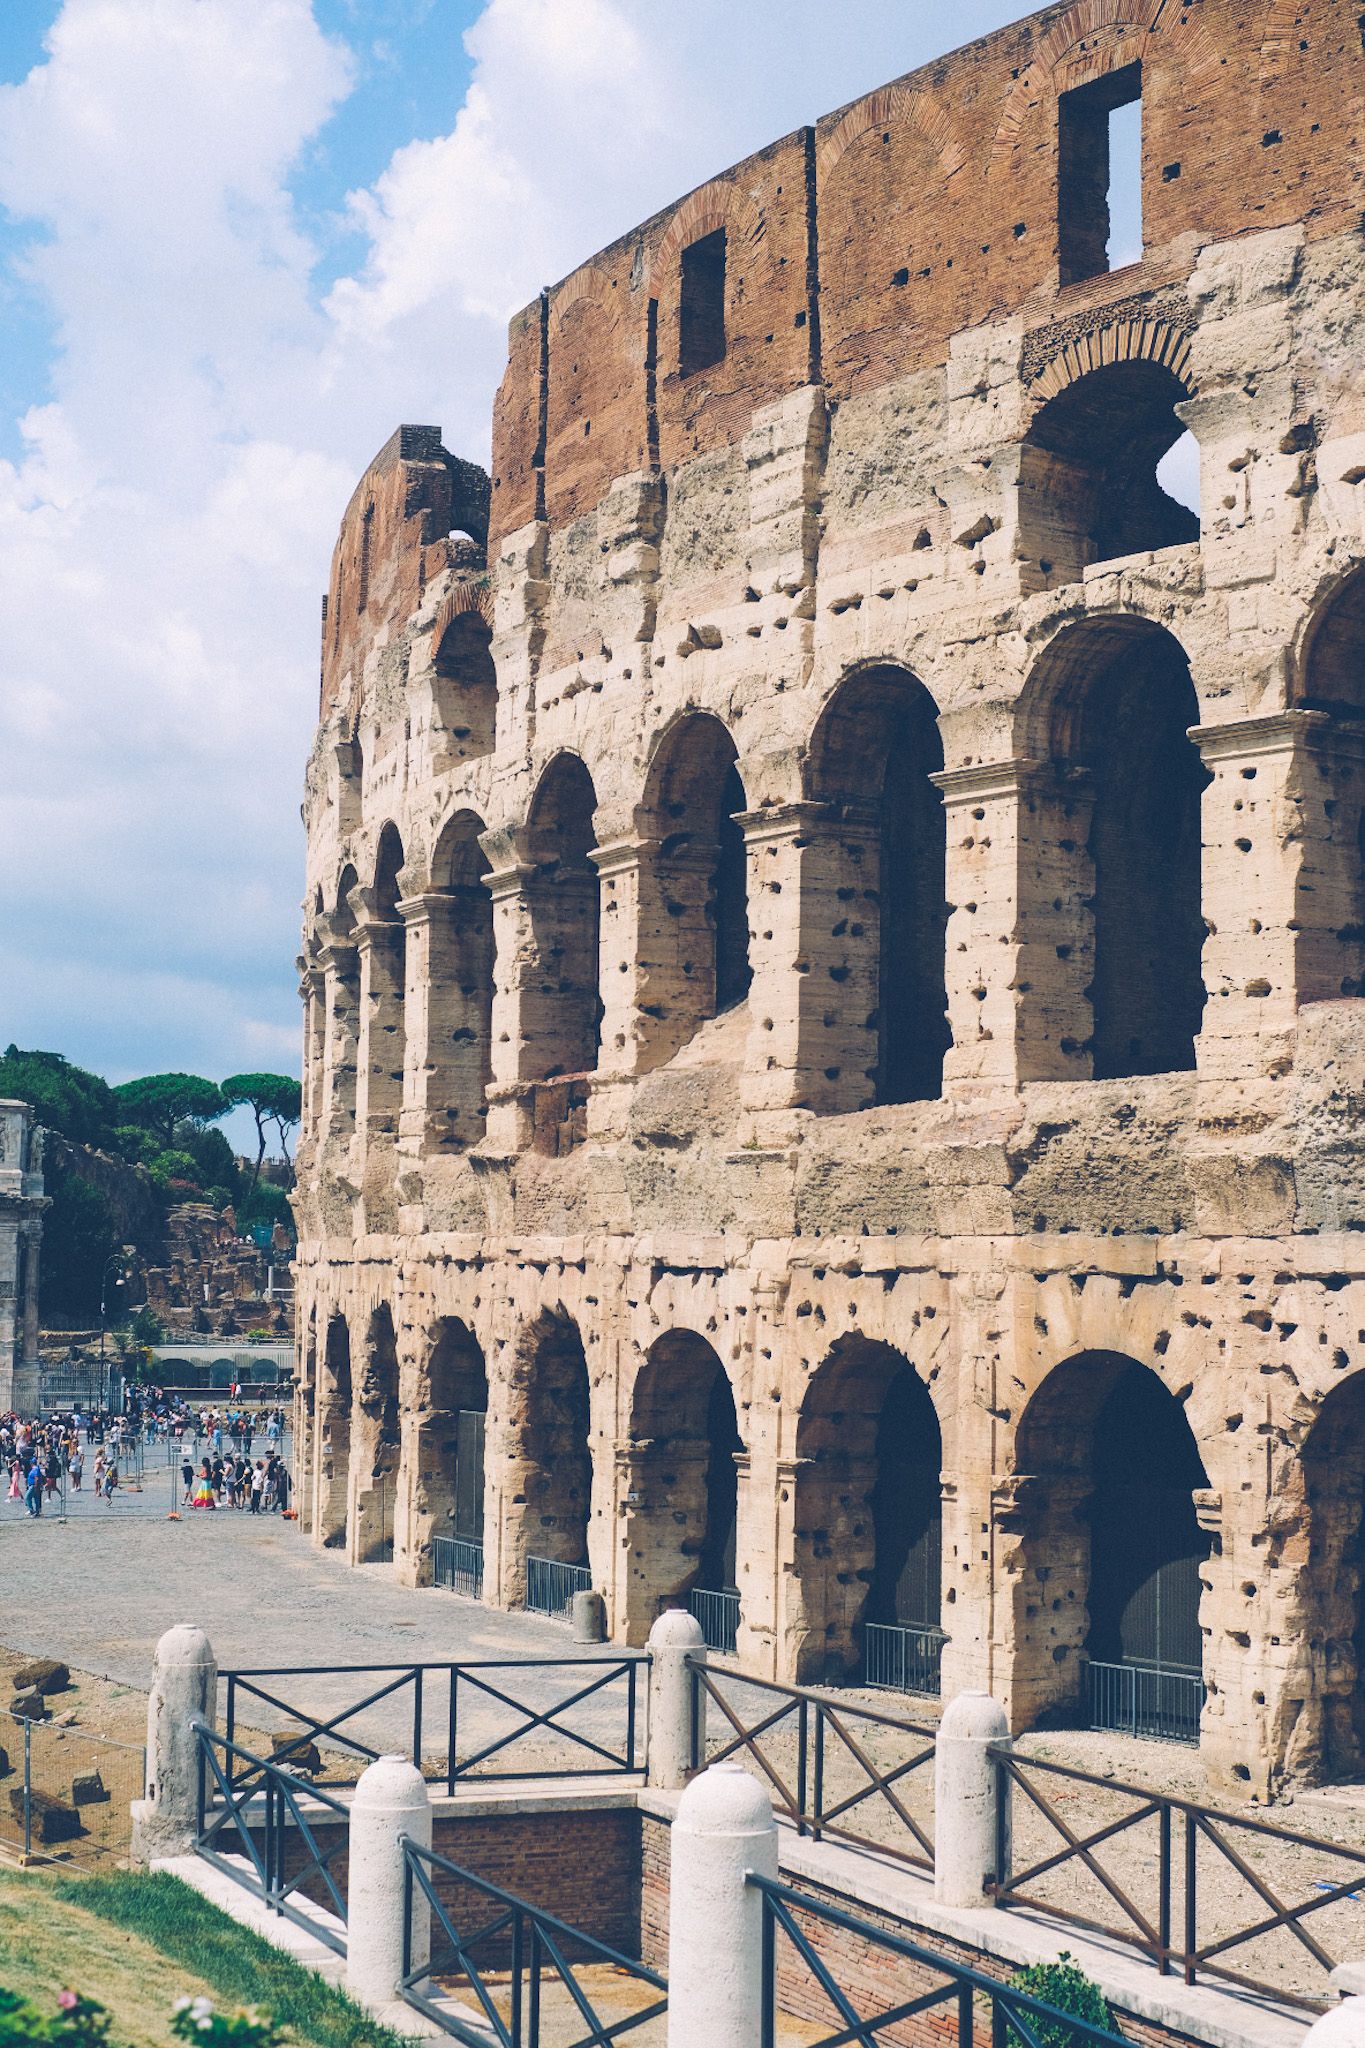 A side view of the Roman colosseum mid-day, in the sunlight.